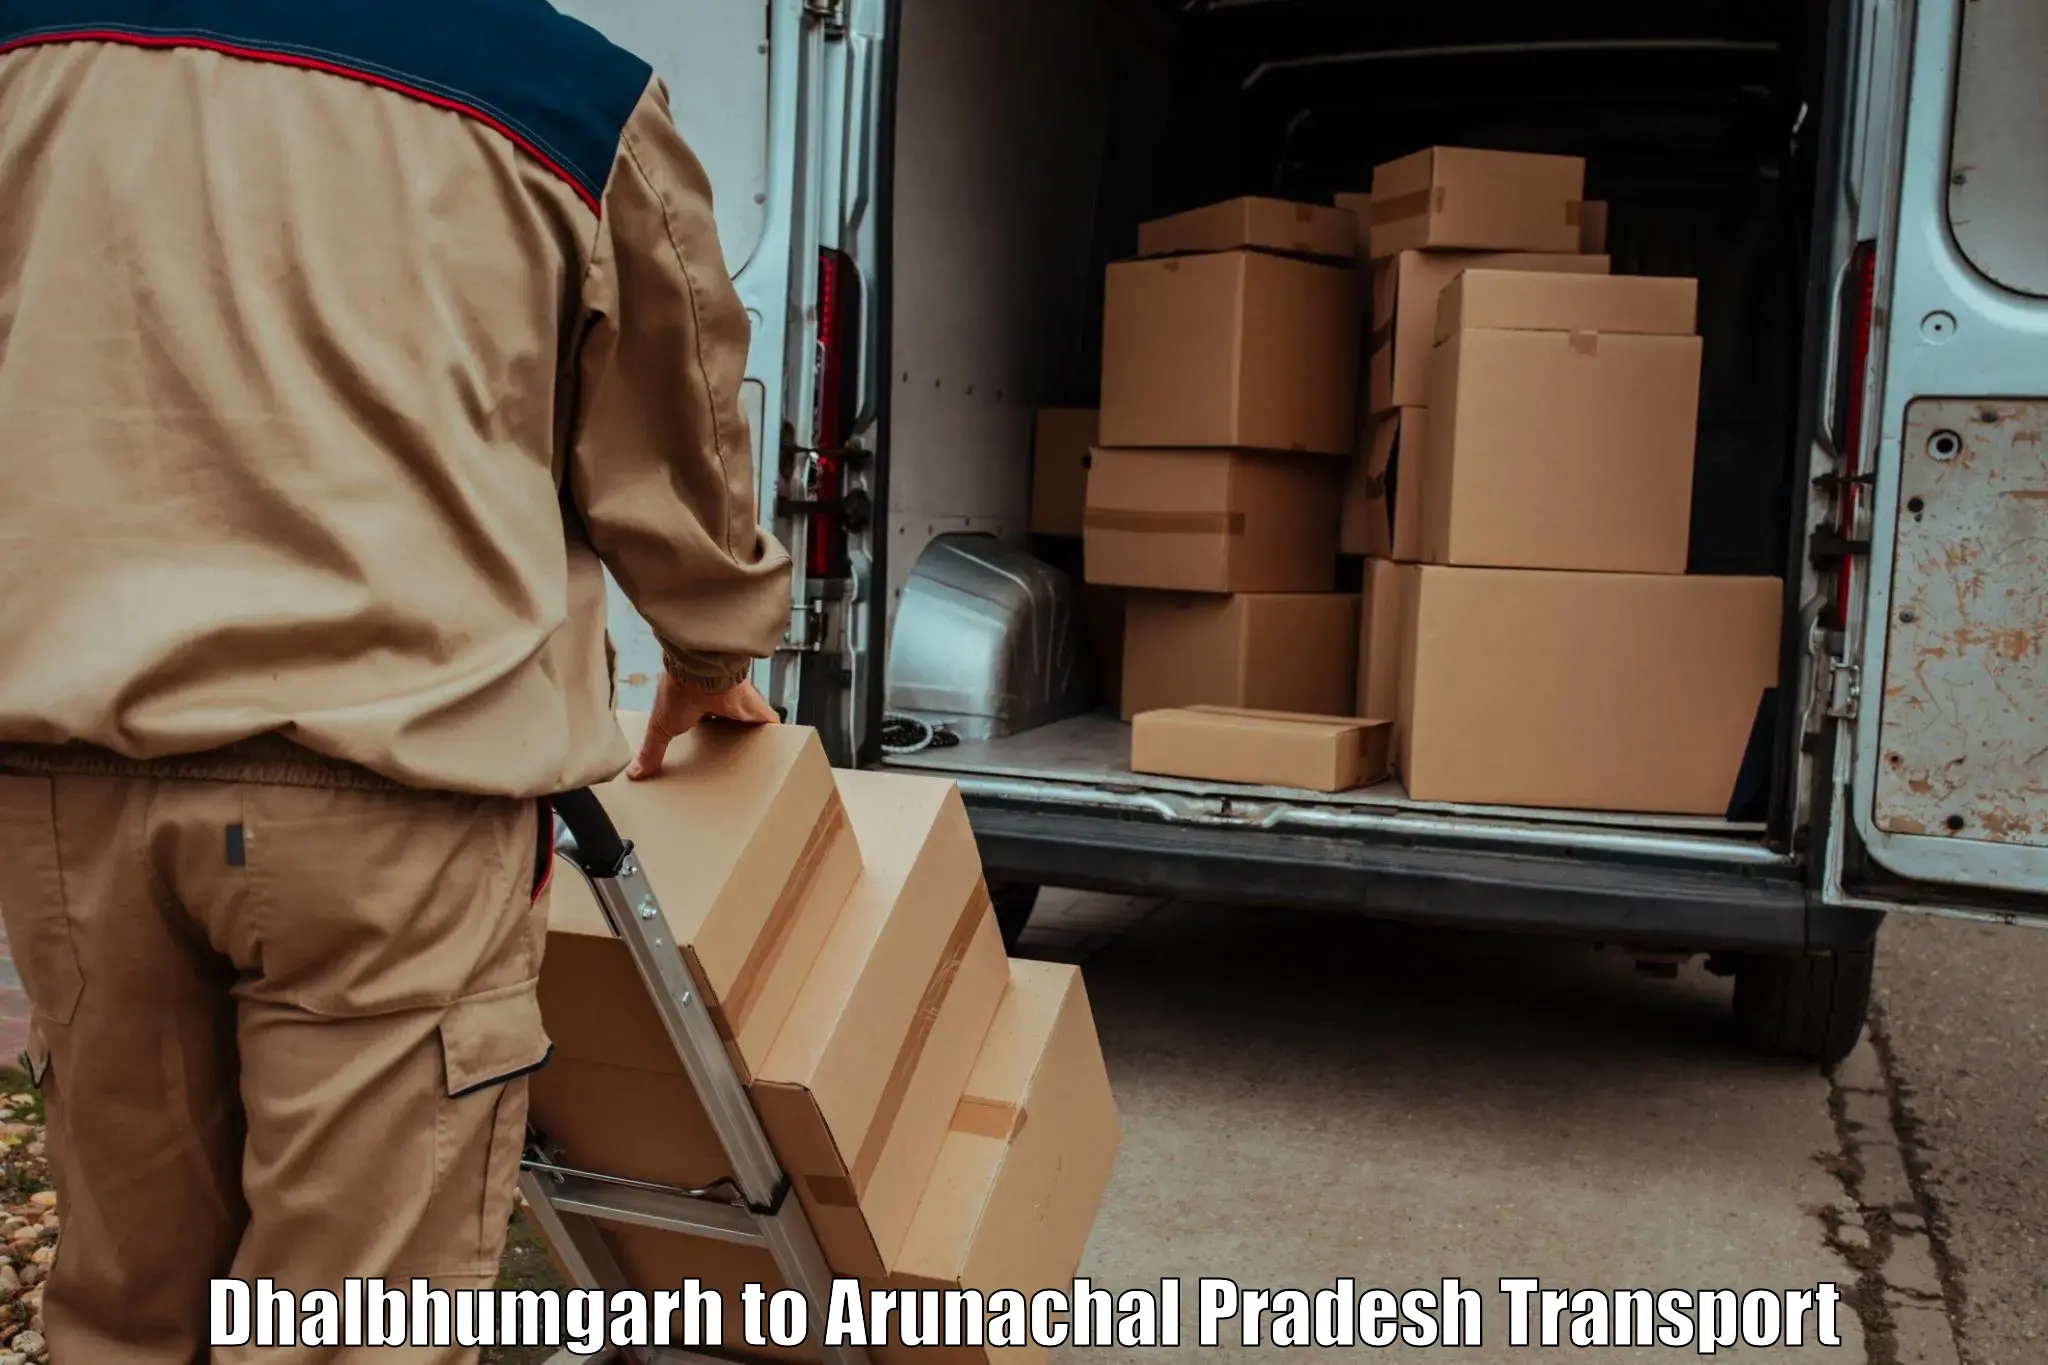 Daily parcel service transport Dhalbhumgarh to Upper Siang